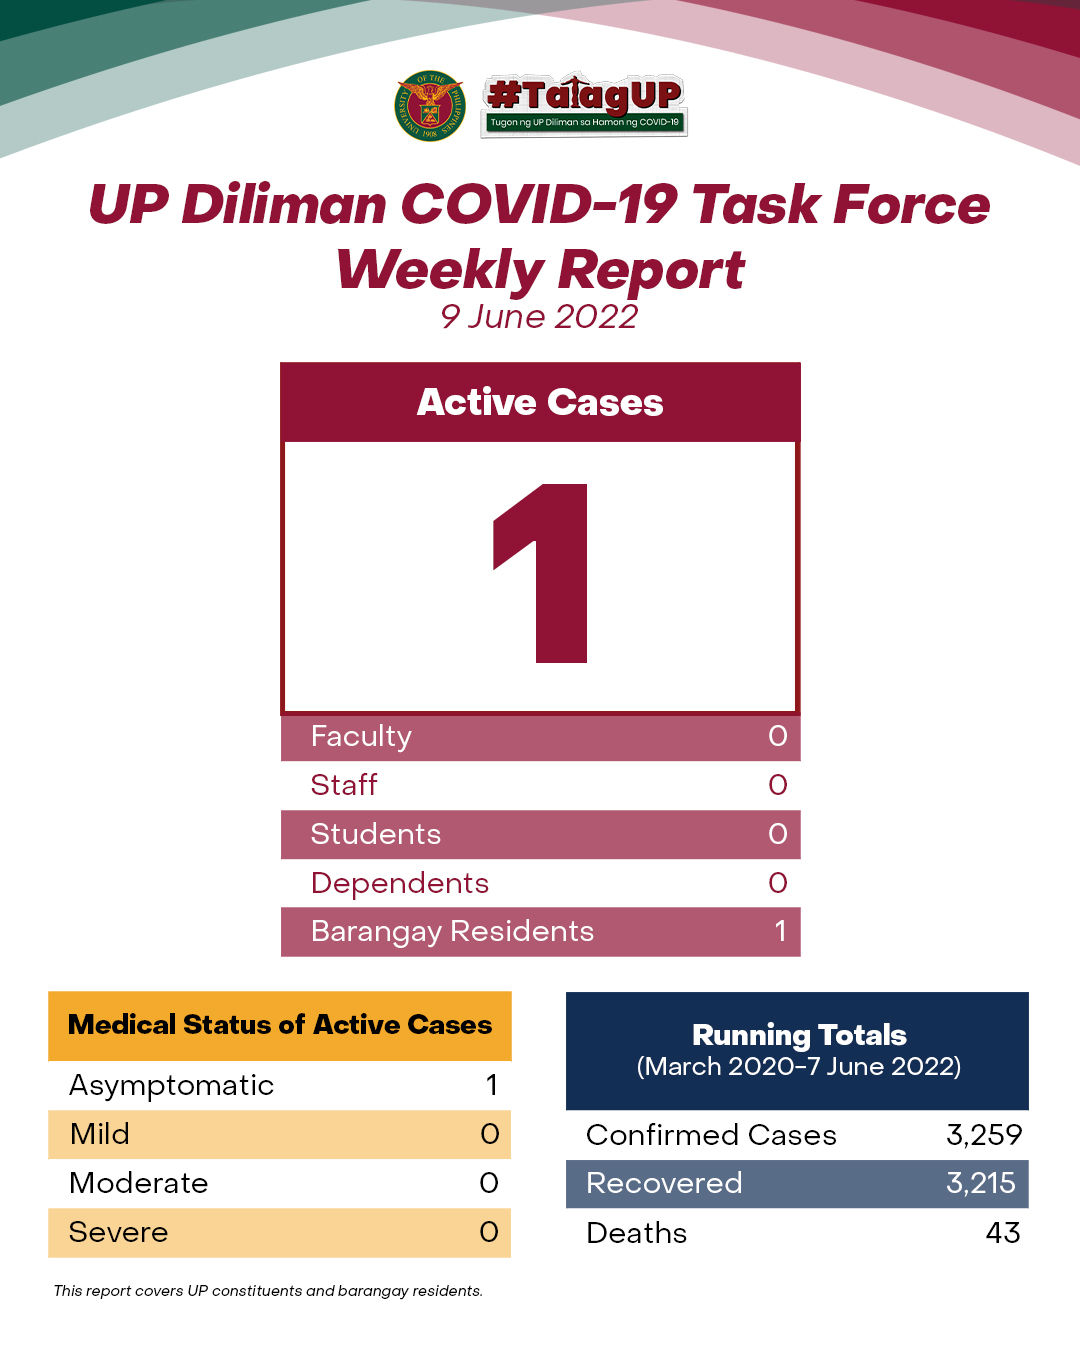 UP Diliman COVID-19 Task Force Weekly Report (9 June 2022)